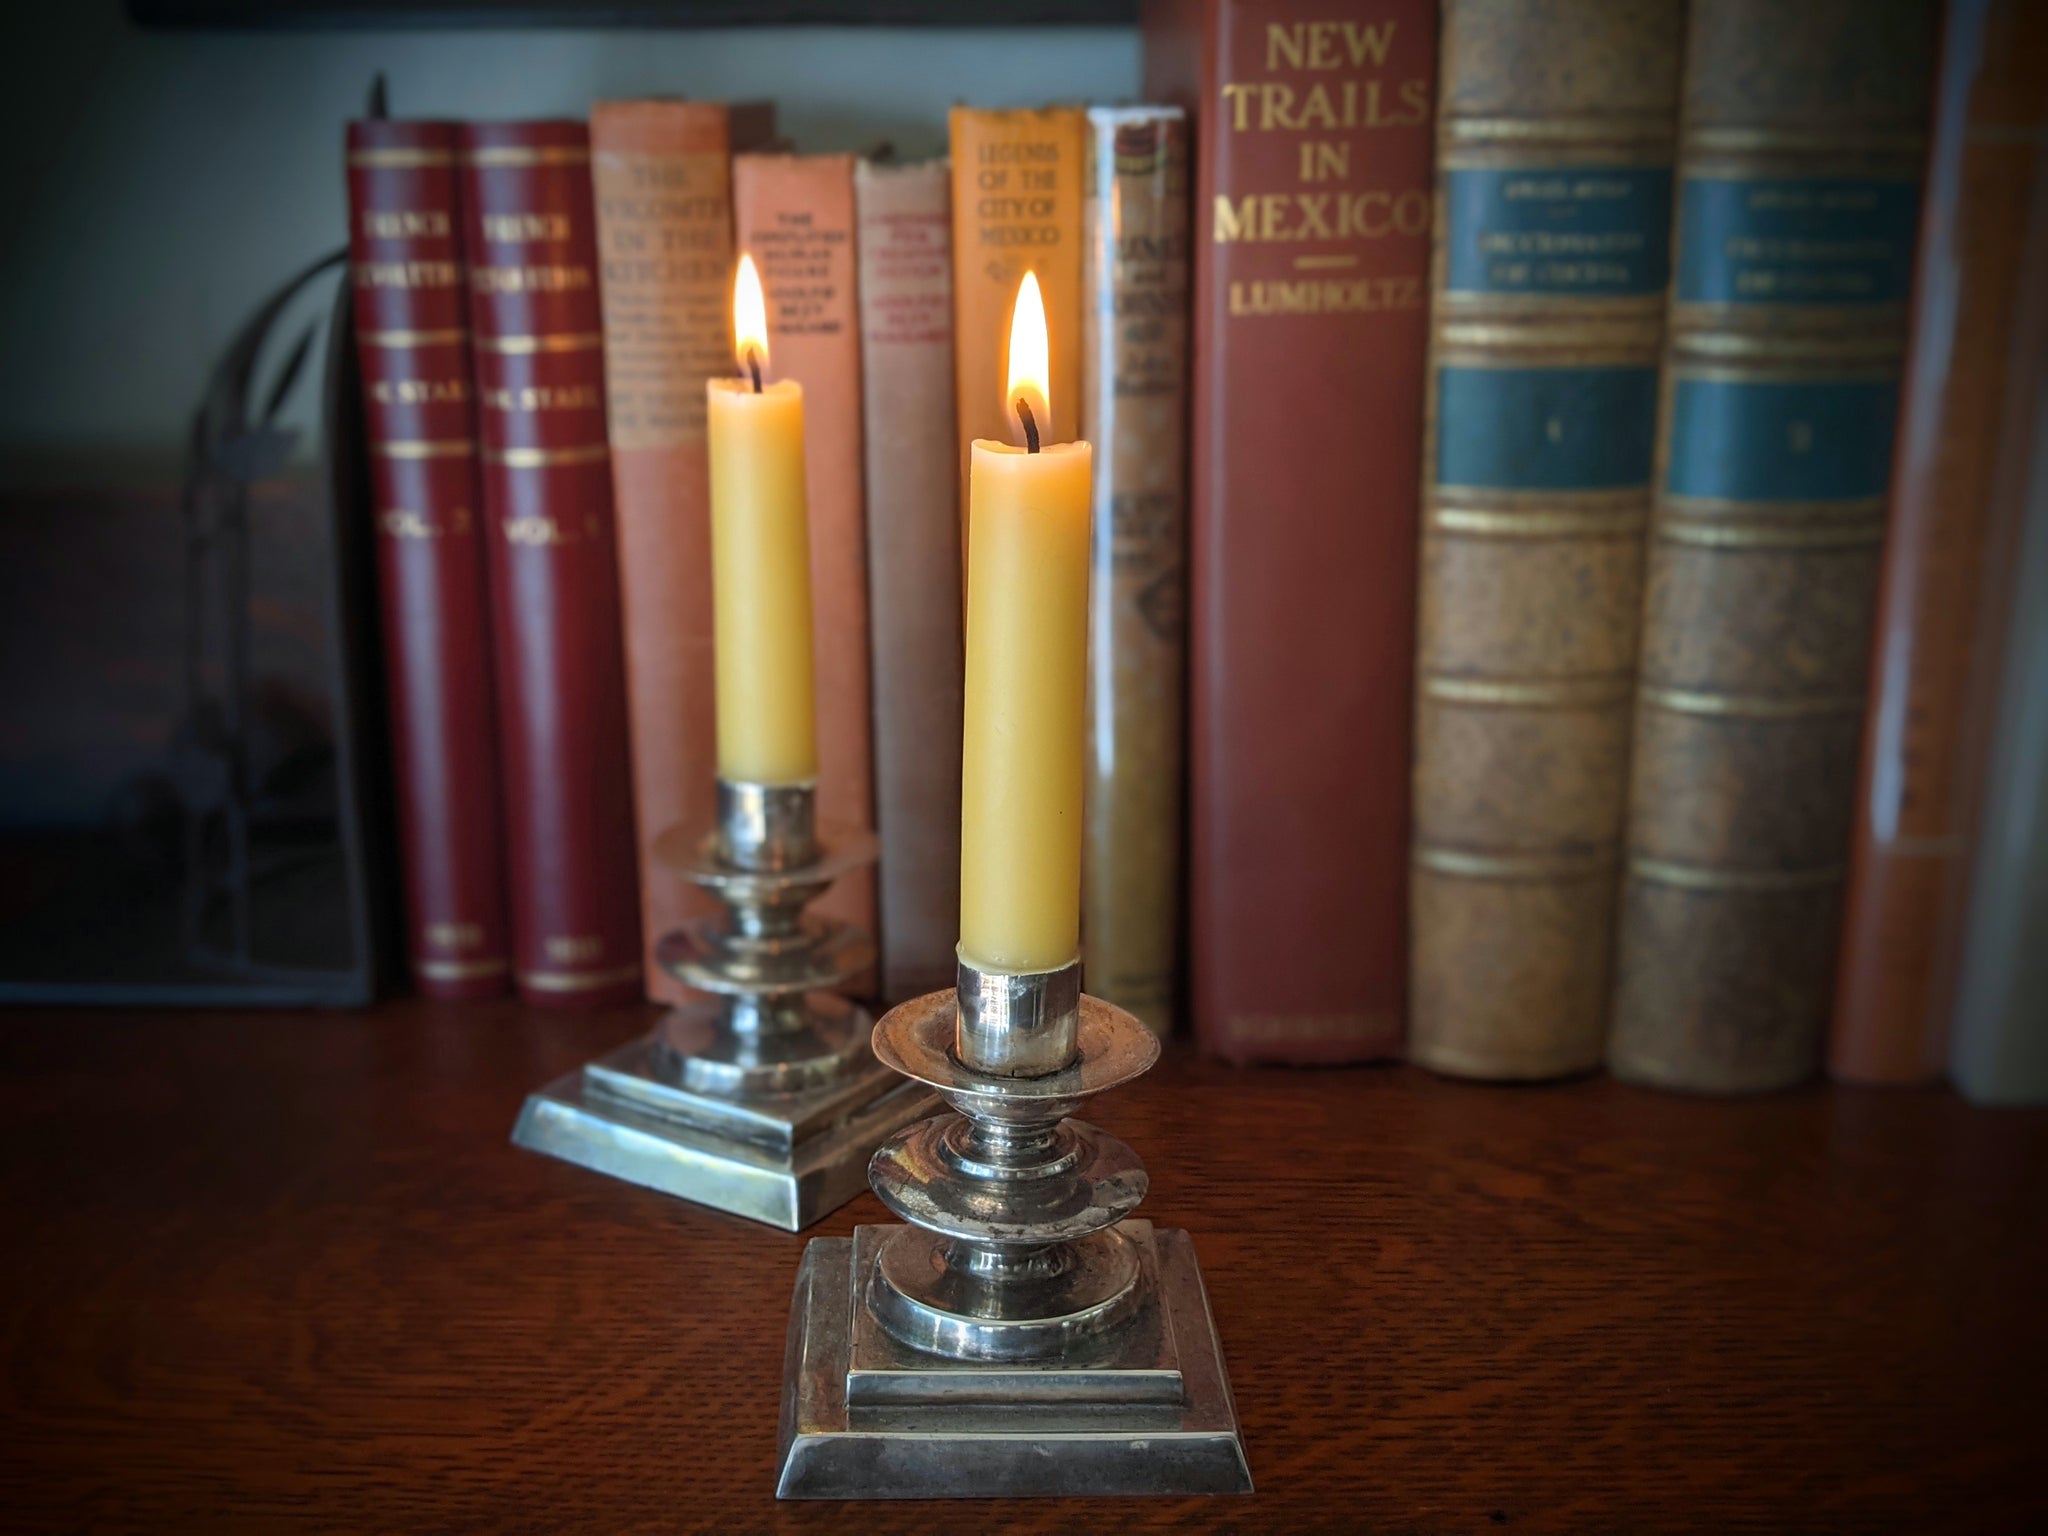 Bluecorn Beeswax – Ridgway, CO  Beeswax Candles Made in Colorado